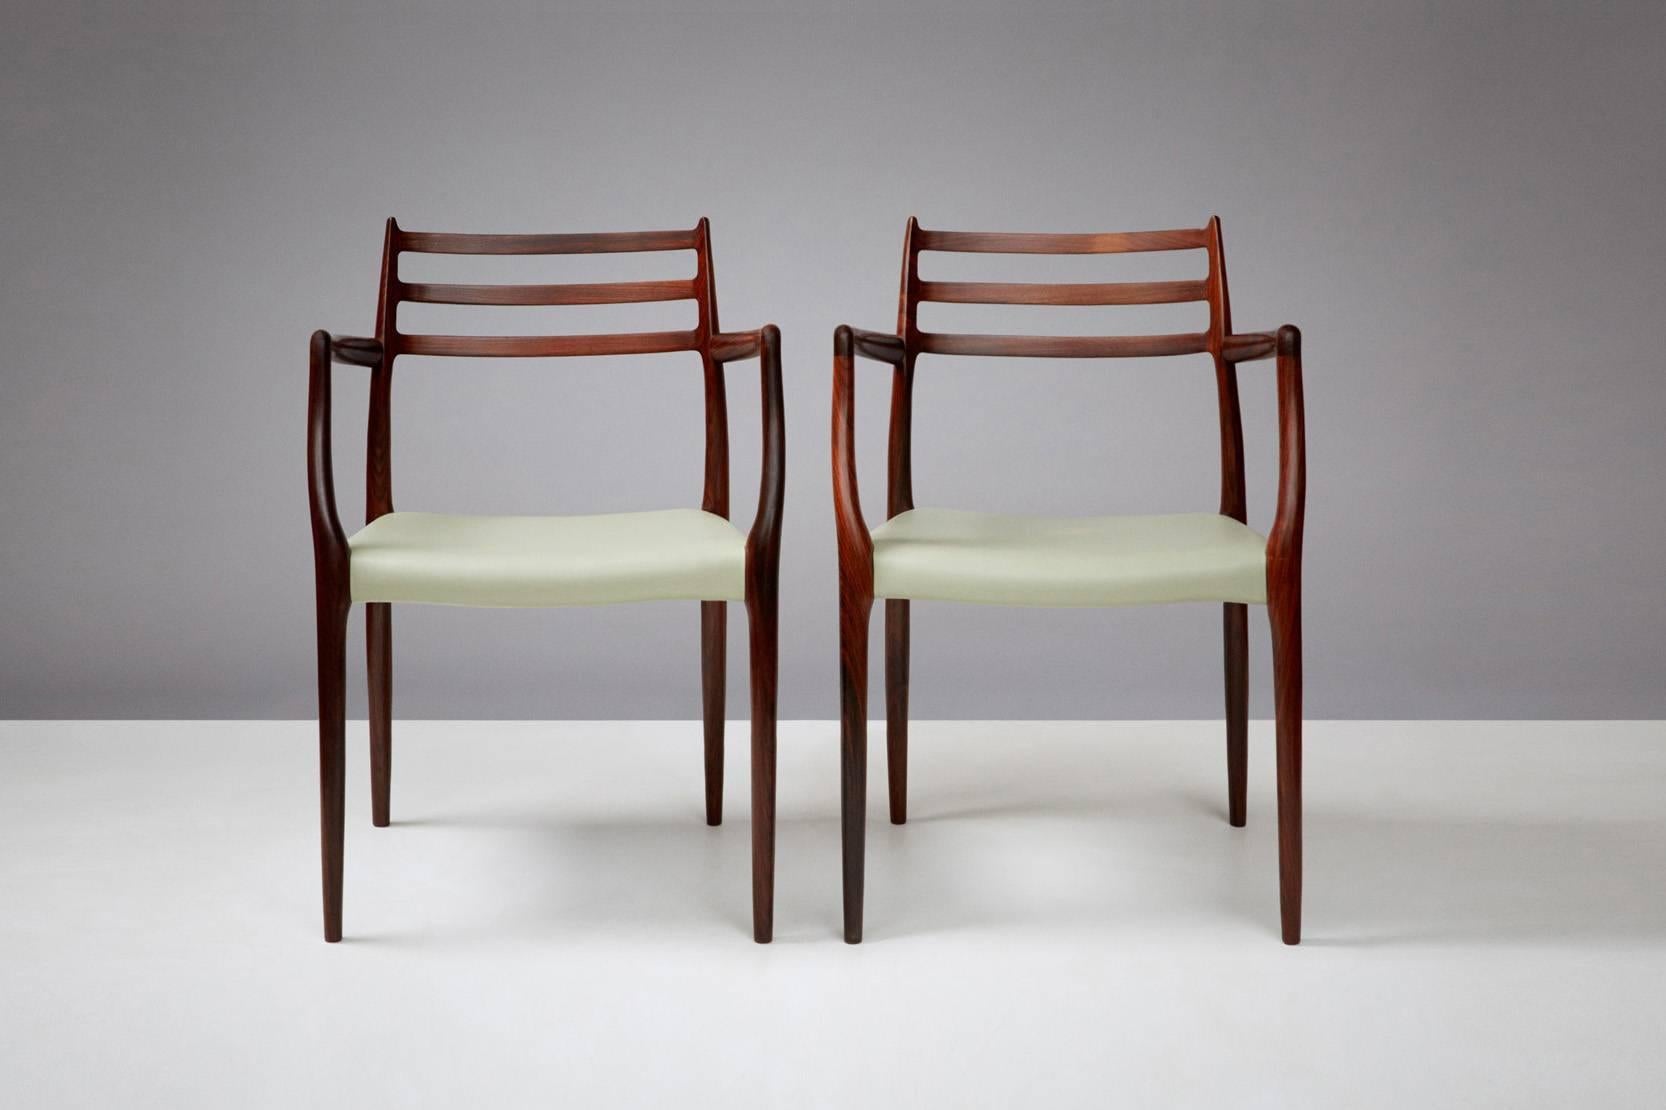 Rosewood armchairs produced by J.L. Mollers Mobelfabrik, Denmark, circa 1960s. Newly covered in pale green leather. Other upholstery options are available by request. 

Can be purchased in conjunction with sets of model 78 dining chairs that we